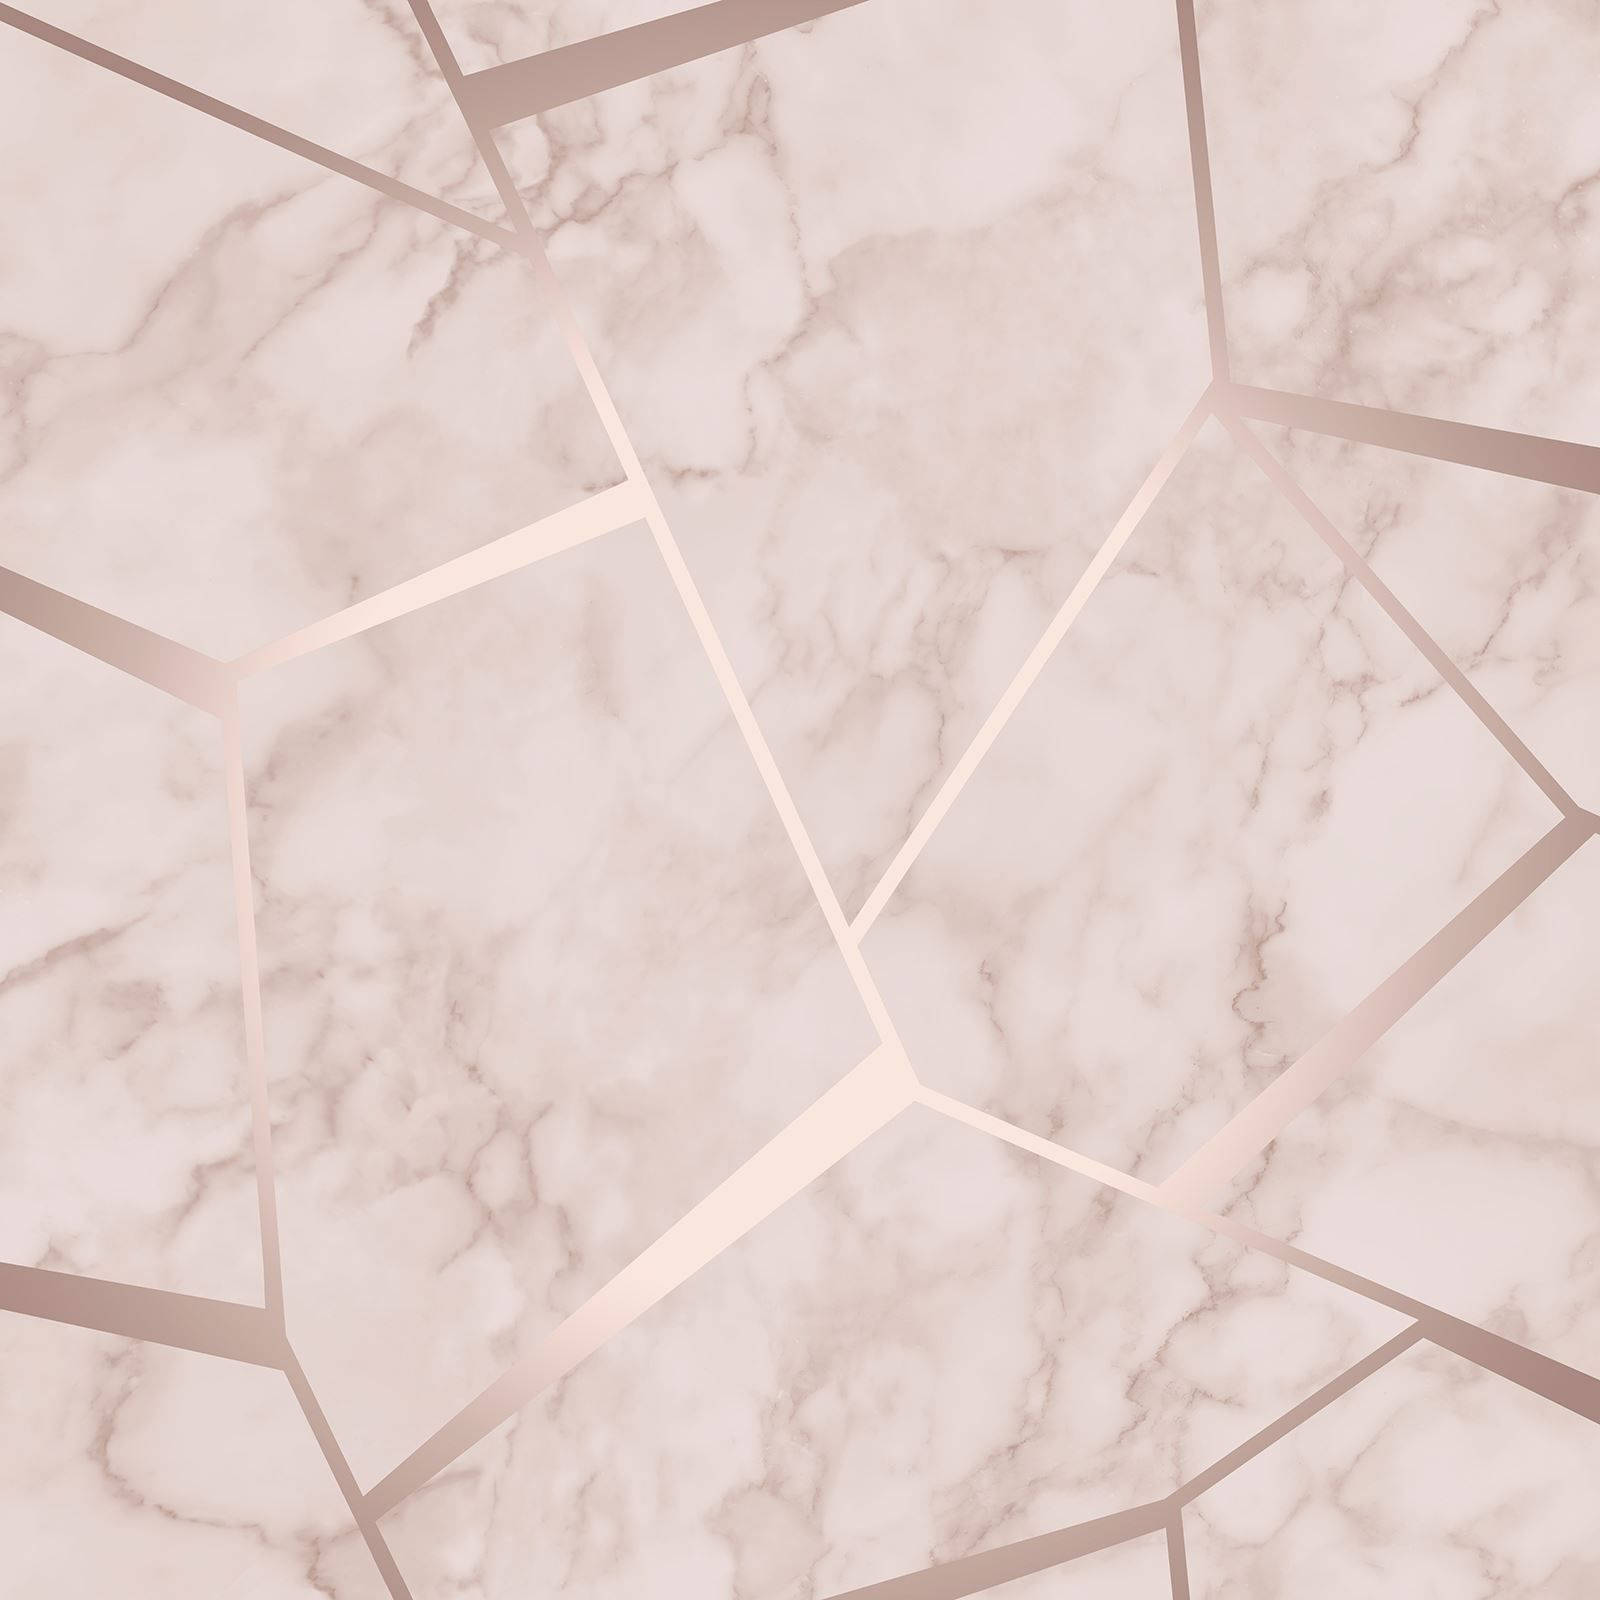 Caption: Exquisite Pink Marble with Geometric Lines Wallpaper